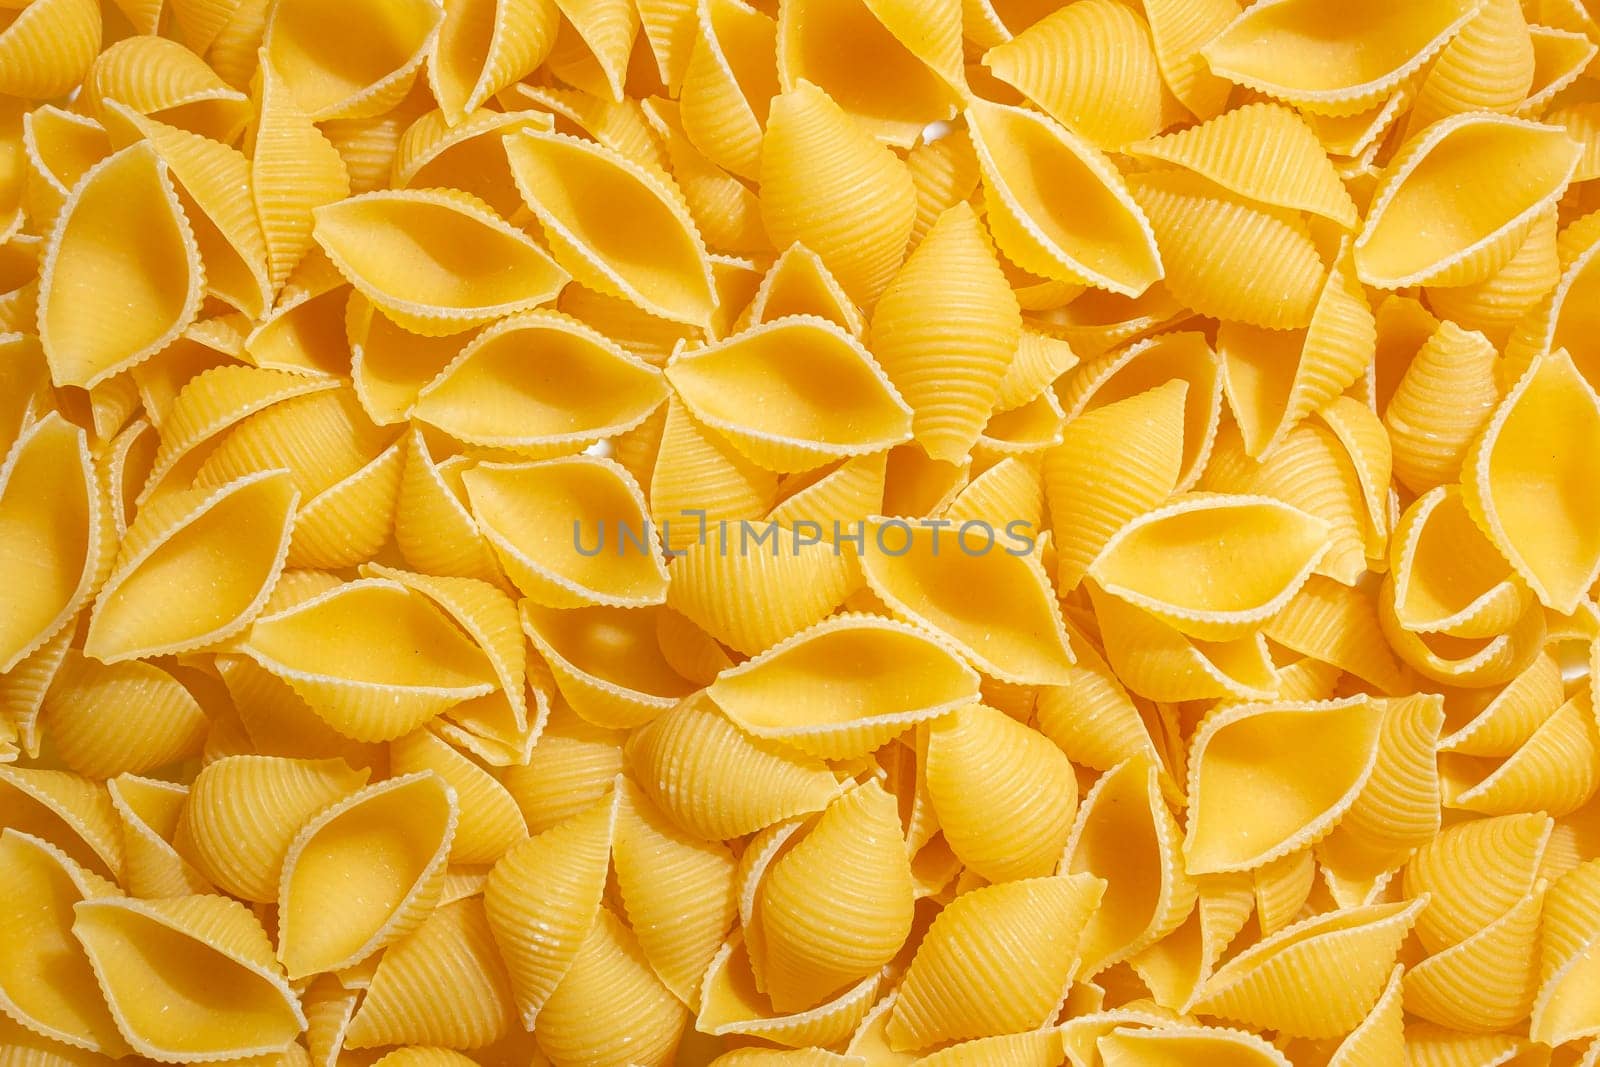 Uncooked Conchiglie Pasta Background by InfinitumProdux